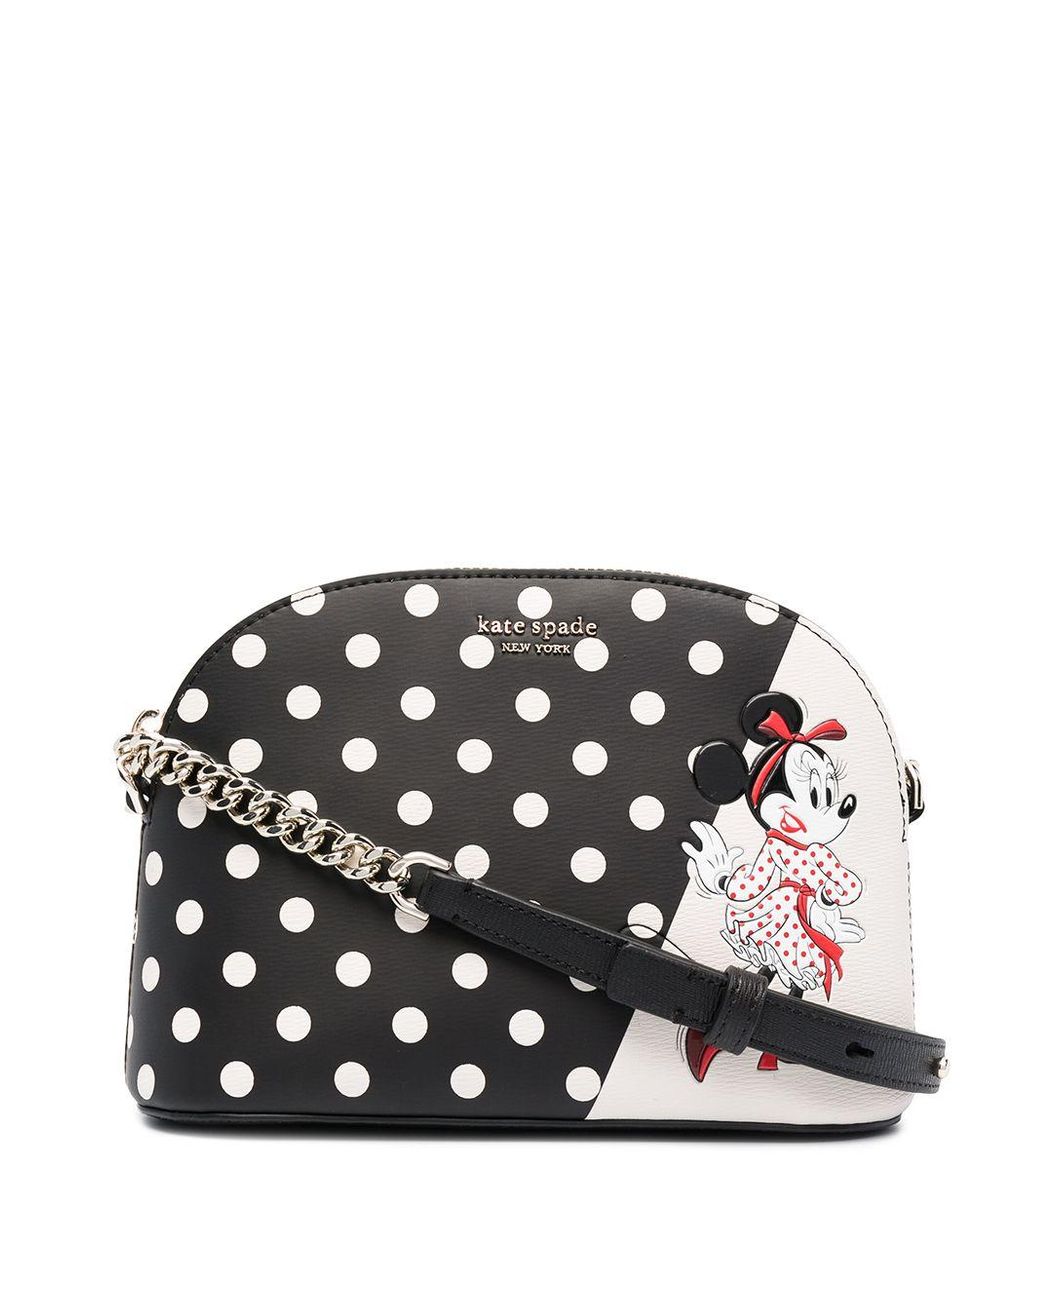 Kate Spade X Disney Minnie Mouse Small Dome Crossbody in Black - Lyst